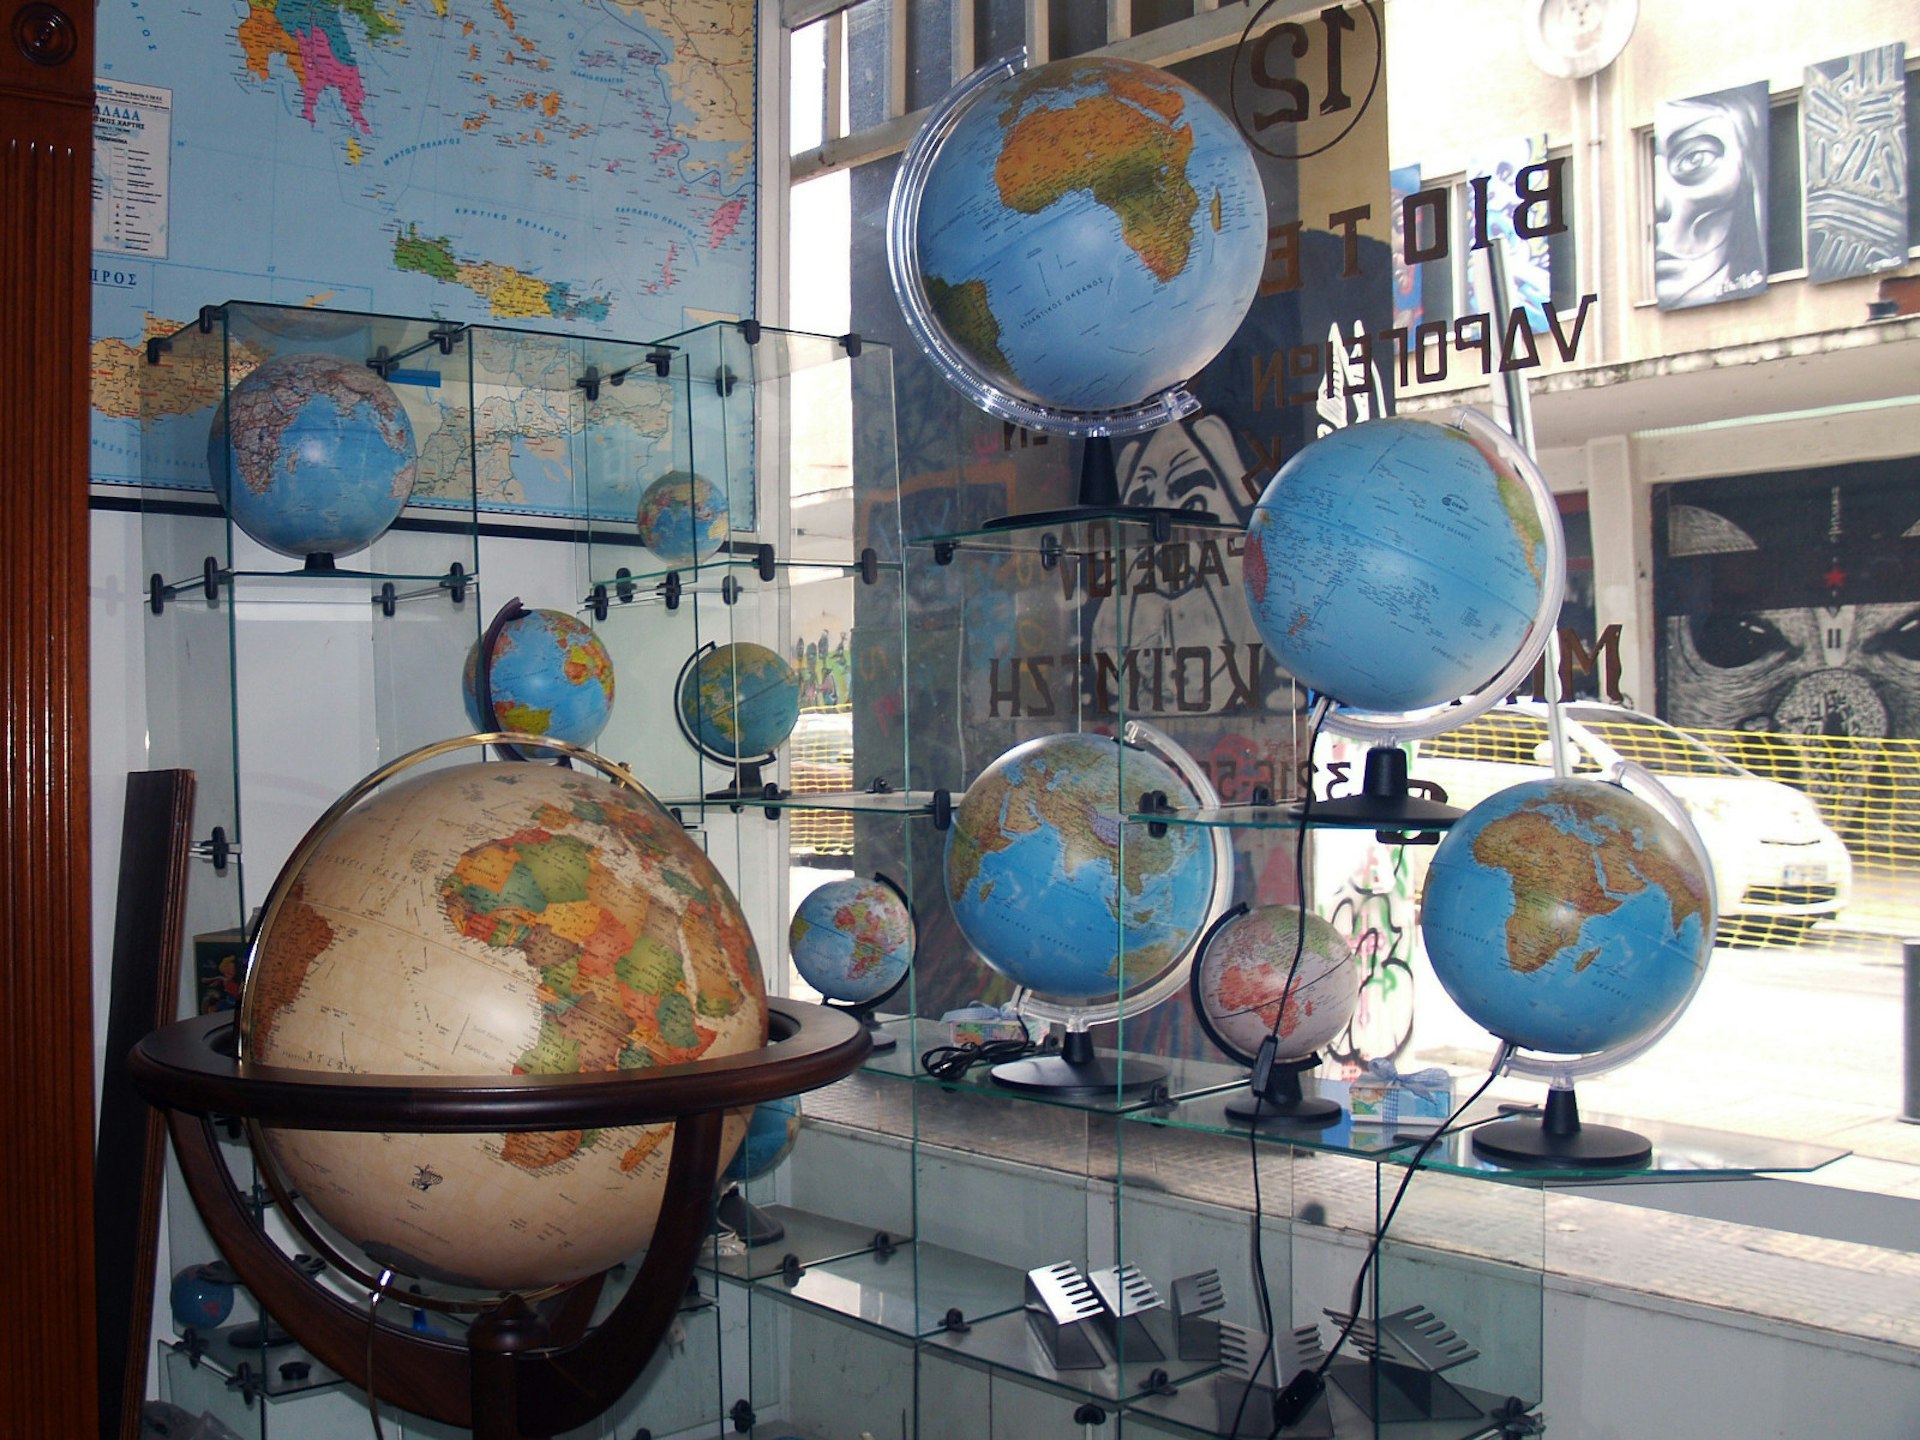 Family-owned Koimtzis Cosmic Globes sells hand-made globes and a variety of maps © Vangelis Koronakis / Lonely Planet